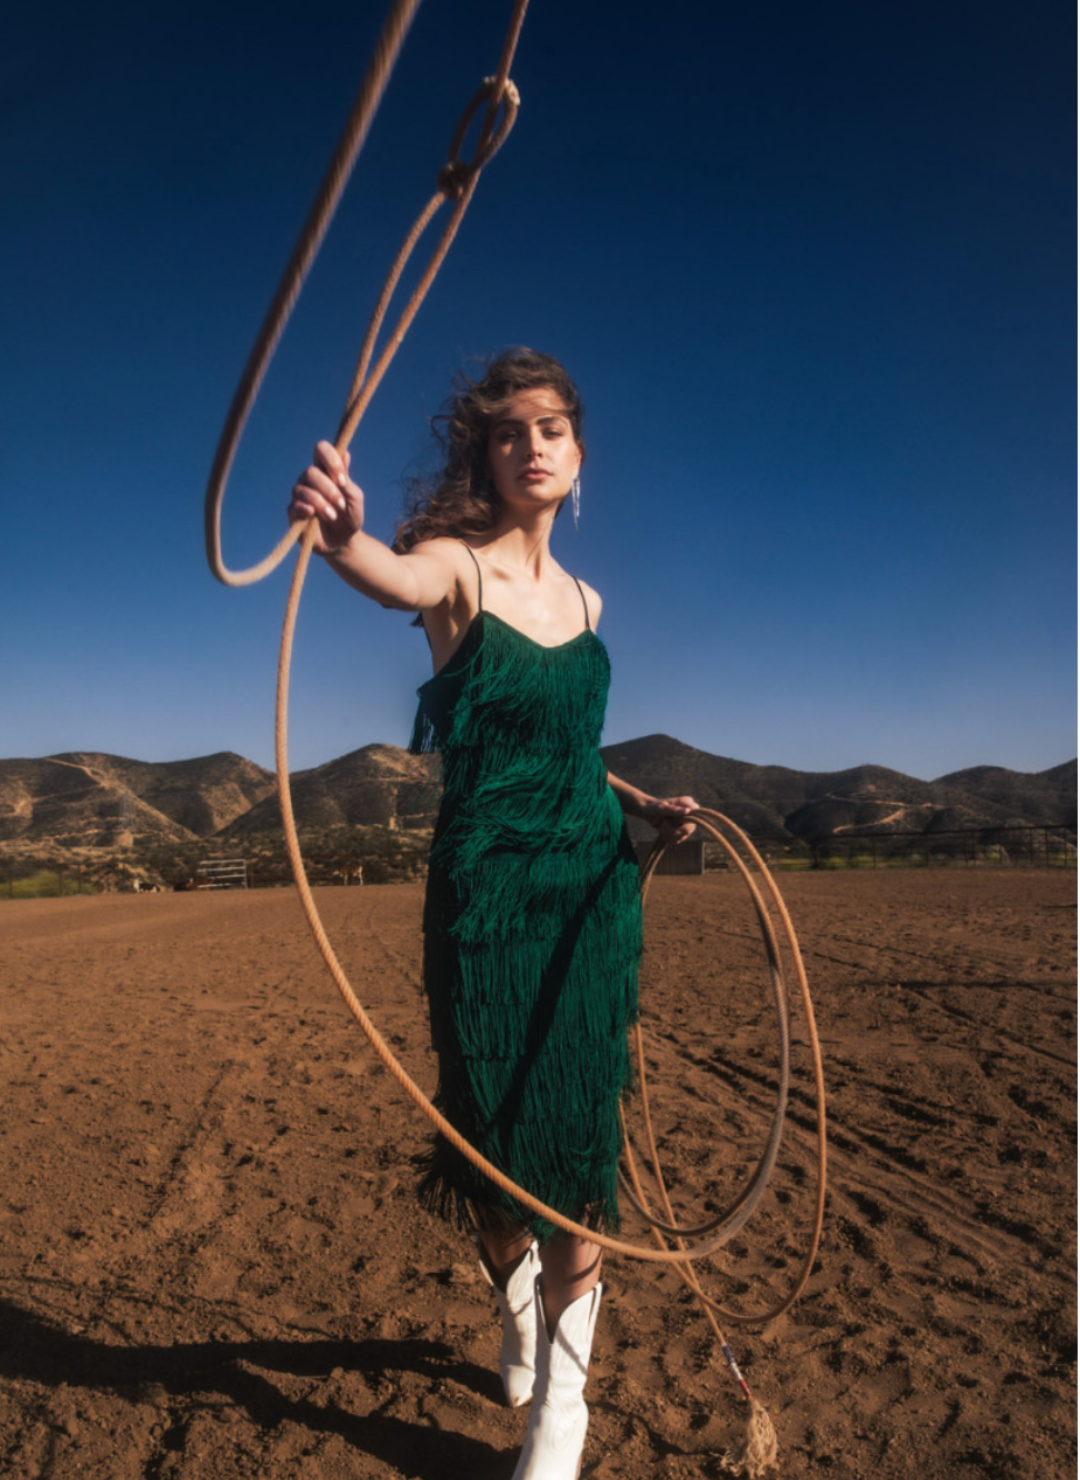 Model throwing lasso wearing Gi Fringe Strap Dress with vibrant green color and fun fringe.